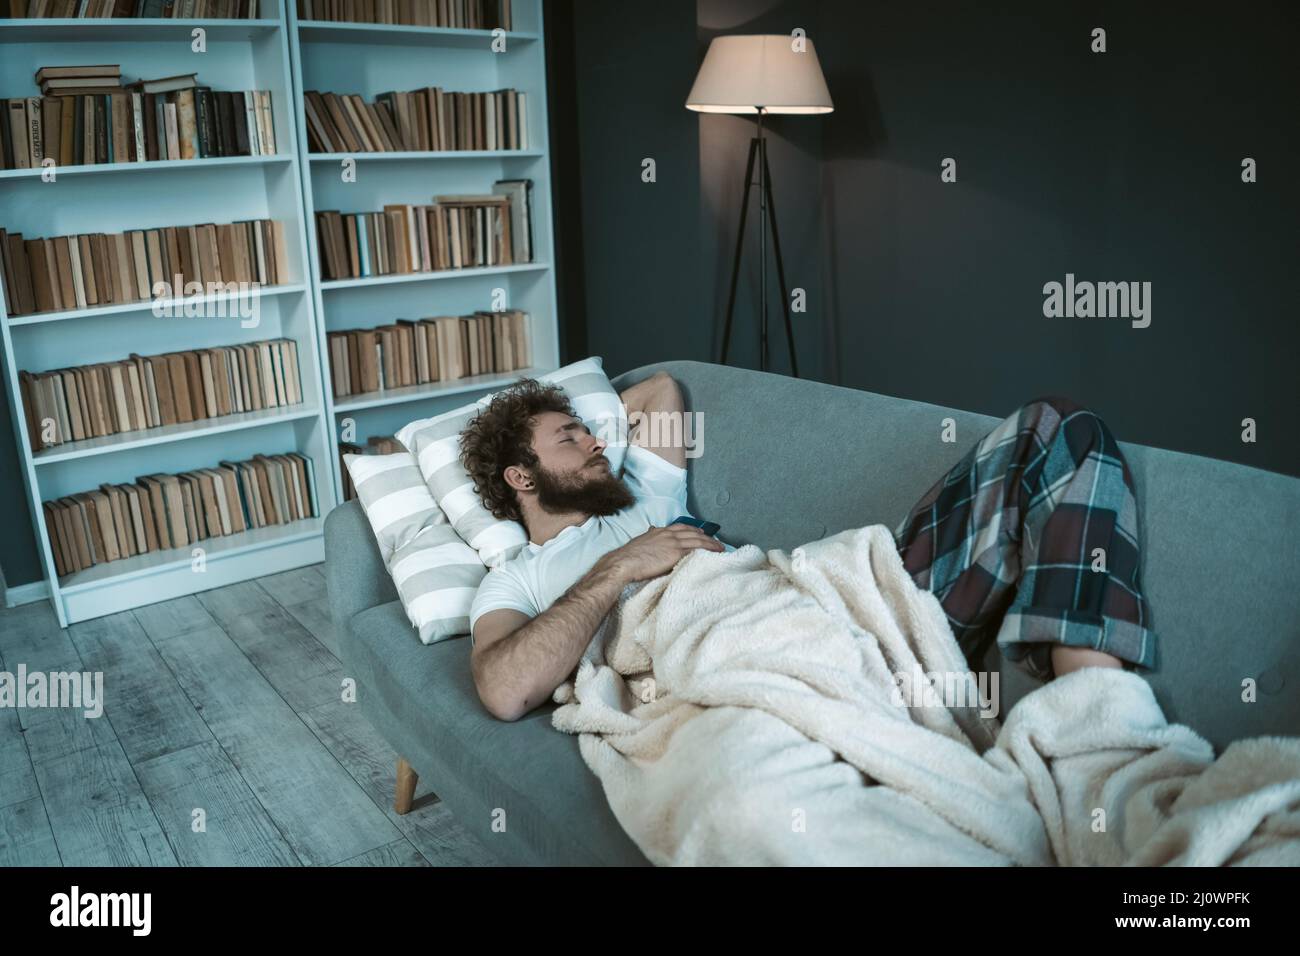 Male model sleeps on couch in her apartment. Concept of student life. Night, home comfort, bedtime. Stock Photo